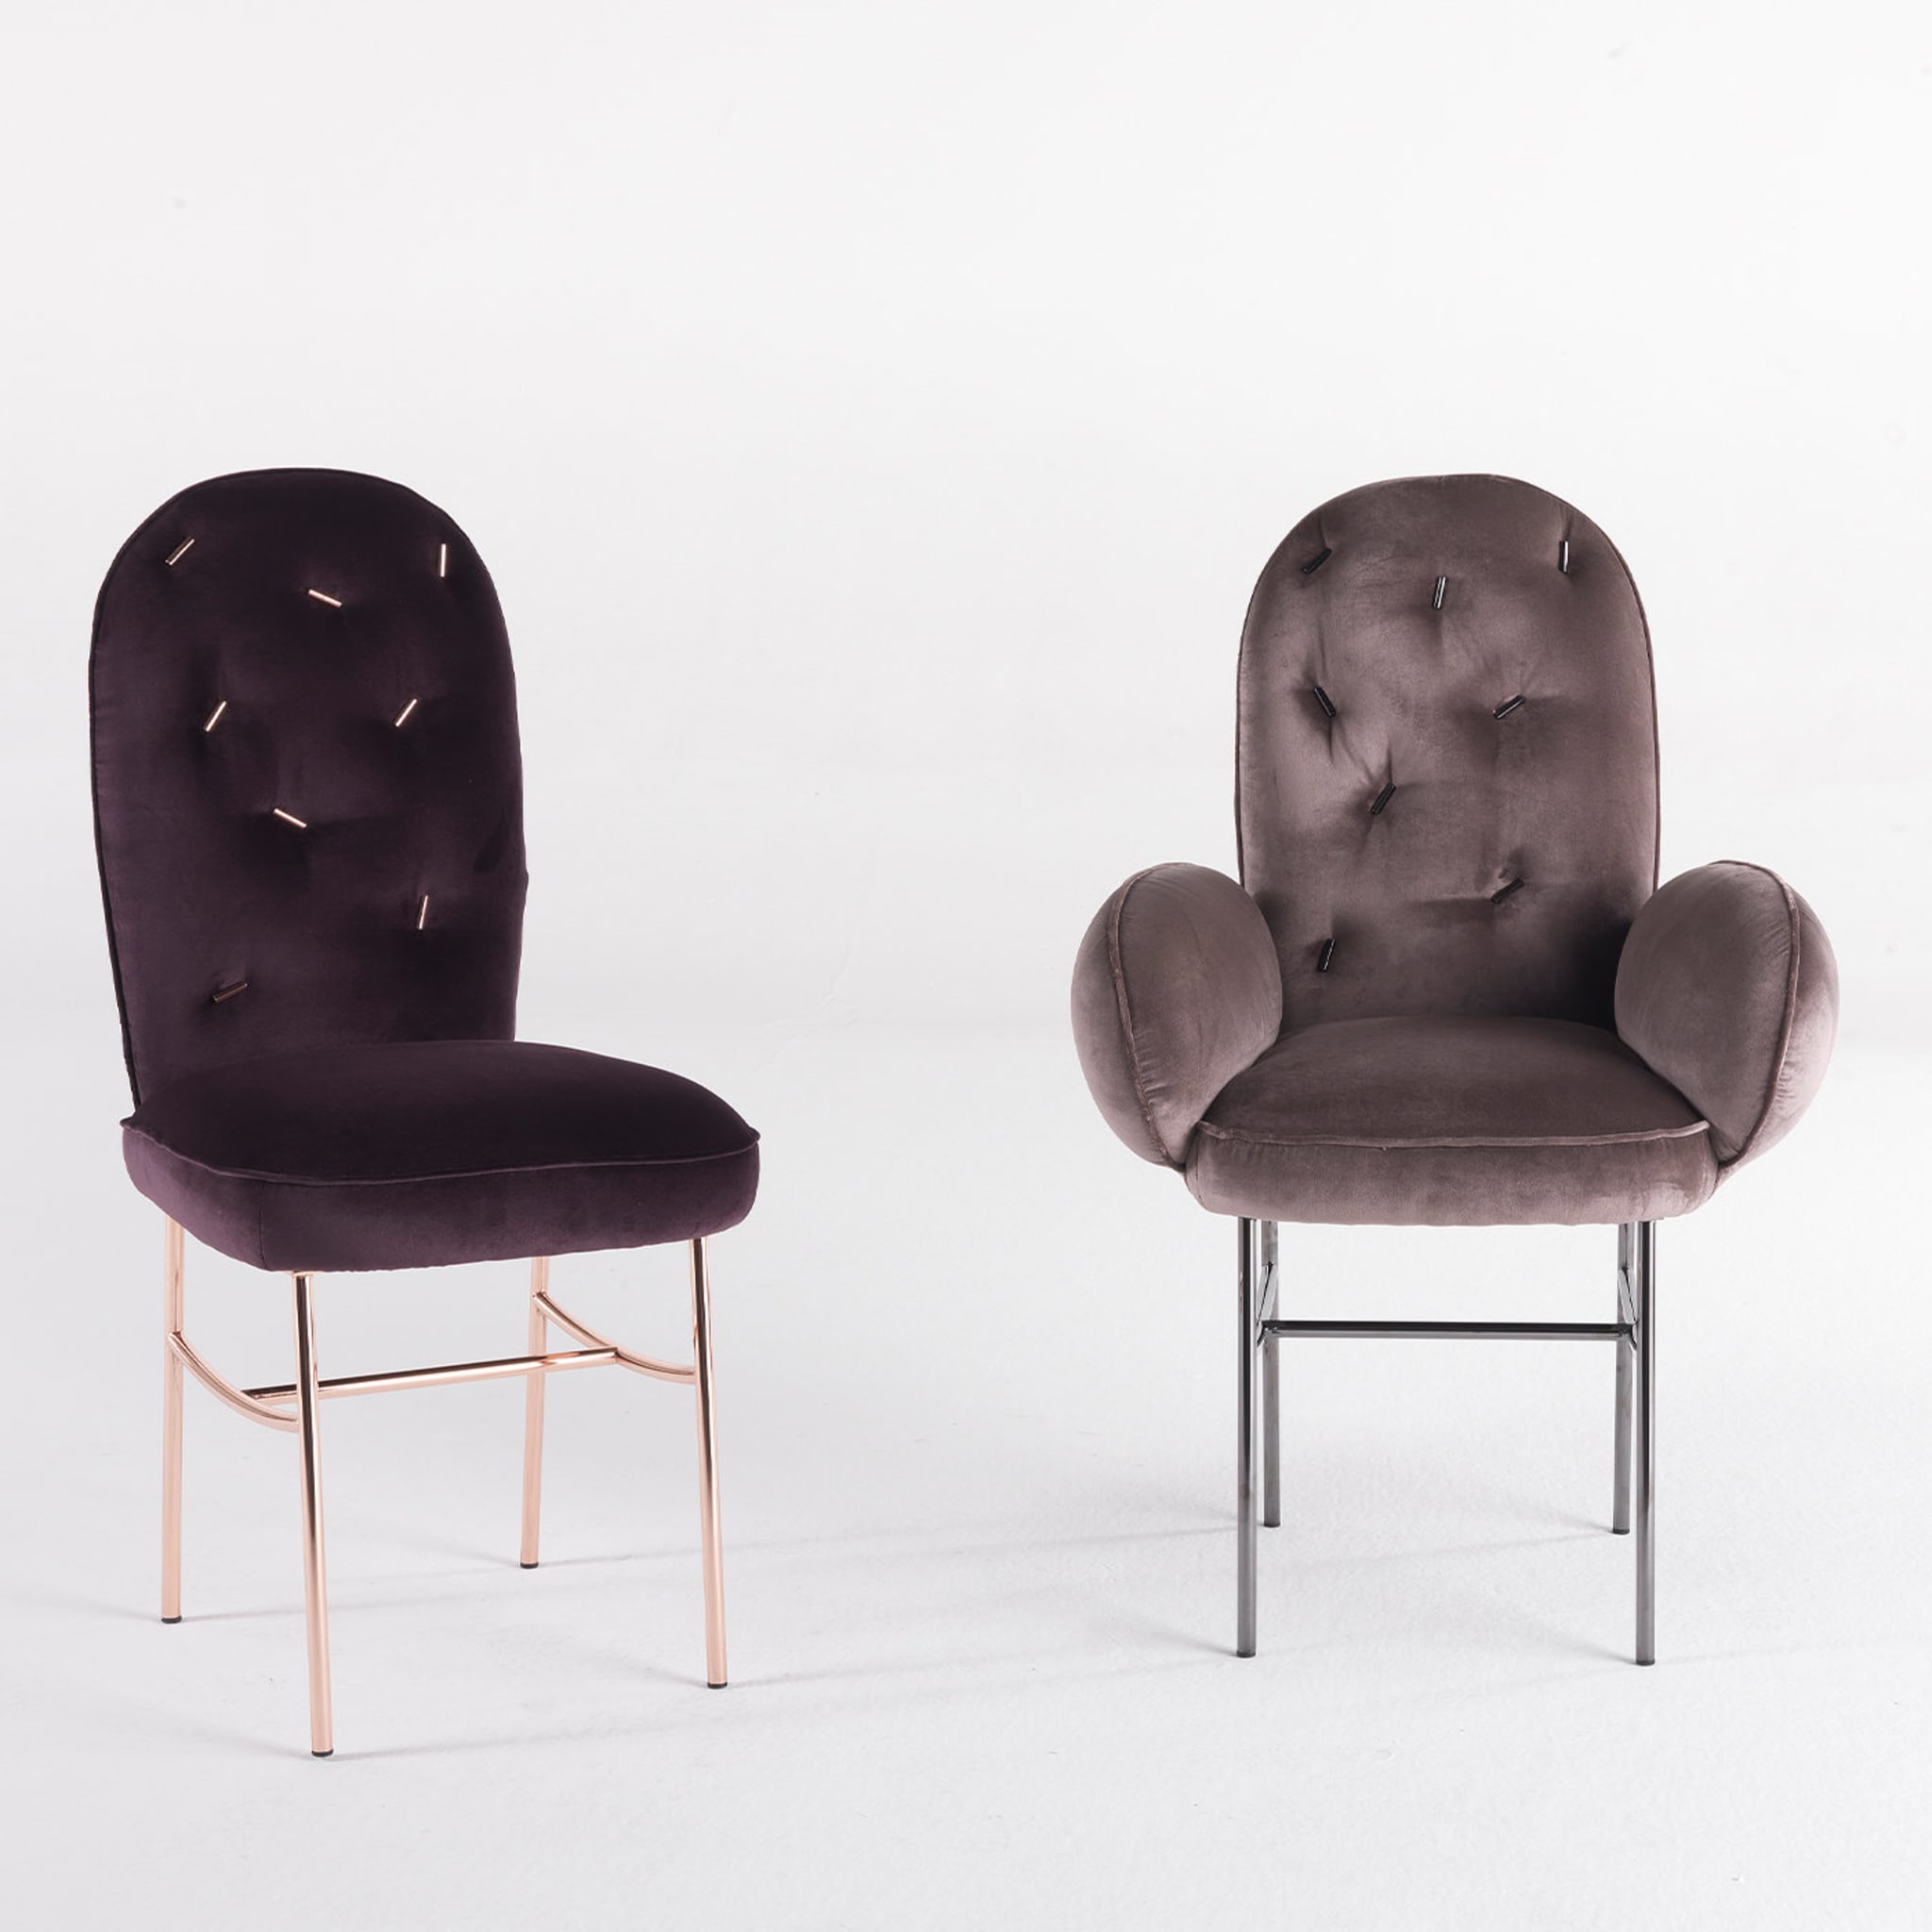 Ttemic Lilac Chair with Arms by Matteo Cibic - Alternative view 3